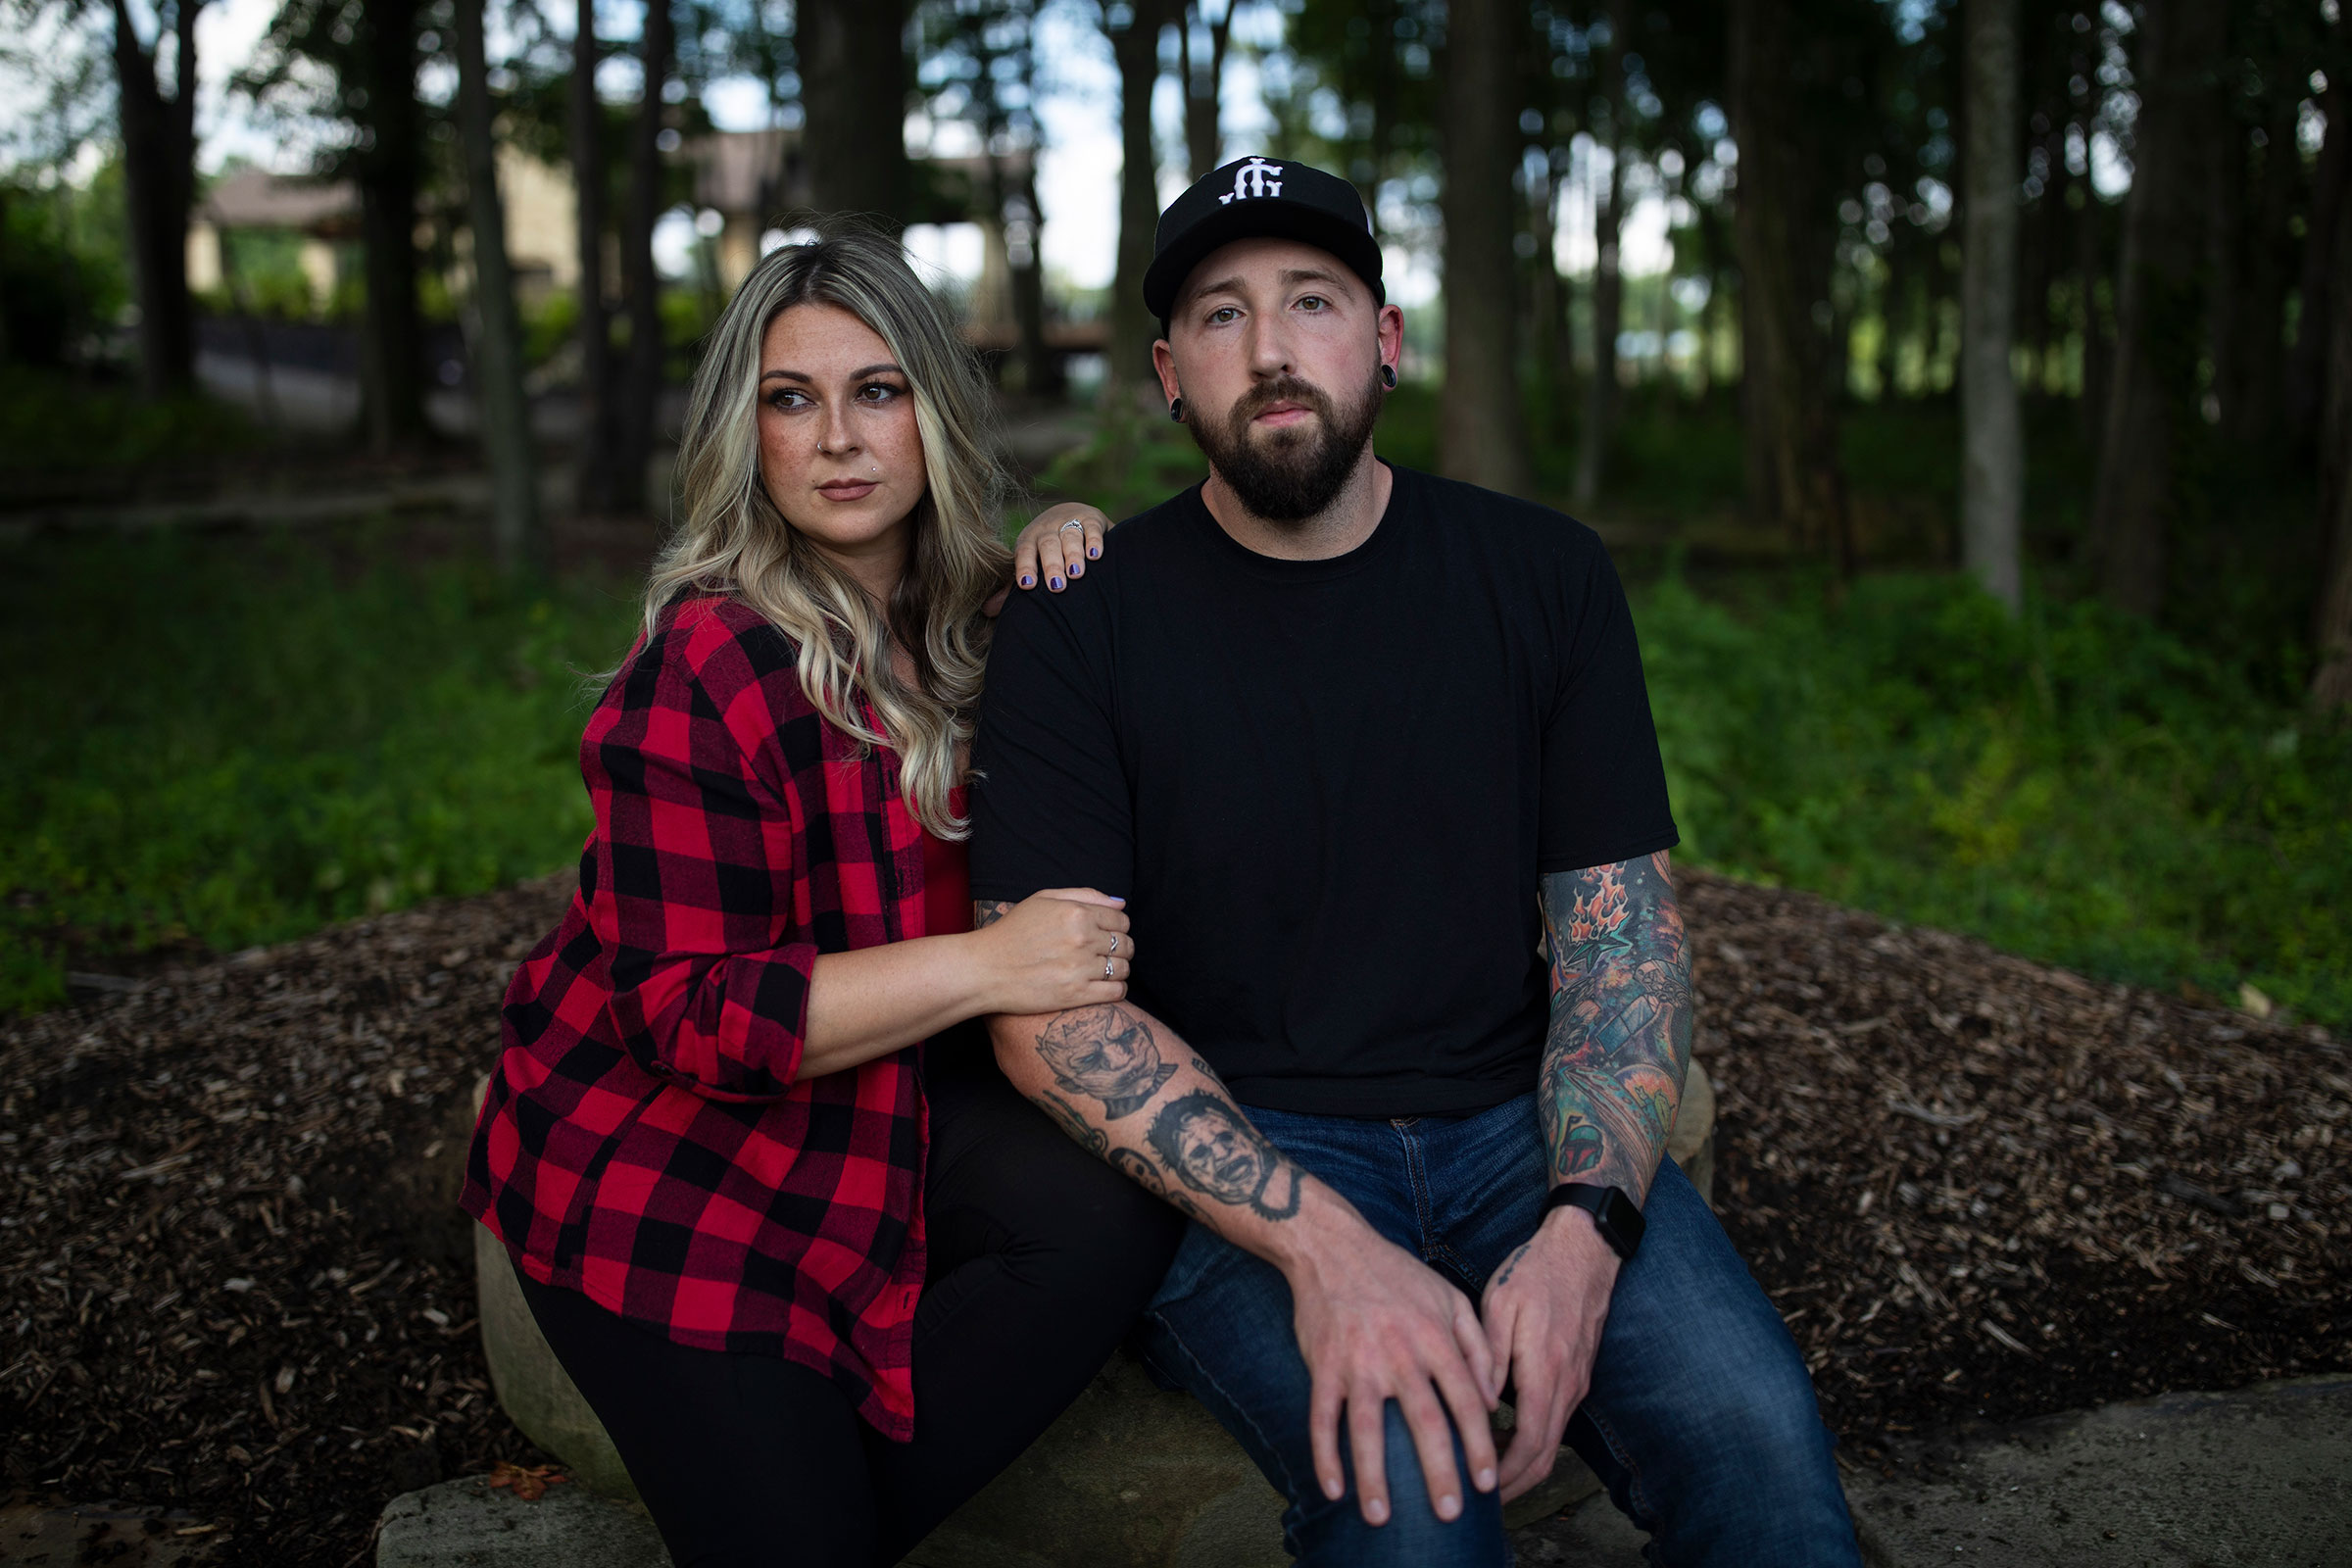 Tara and Justin George on Aug. 22, at a park near their home. (Maddie McGarvey for TIME)